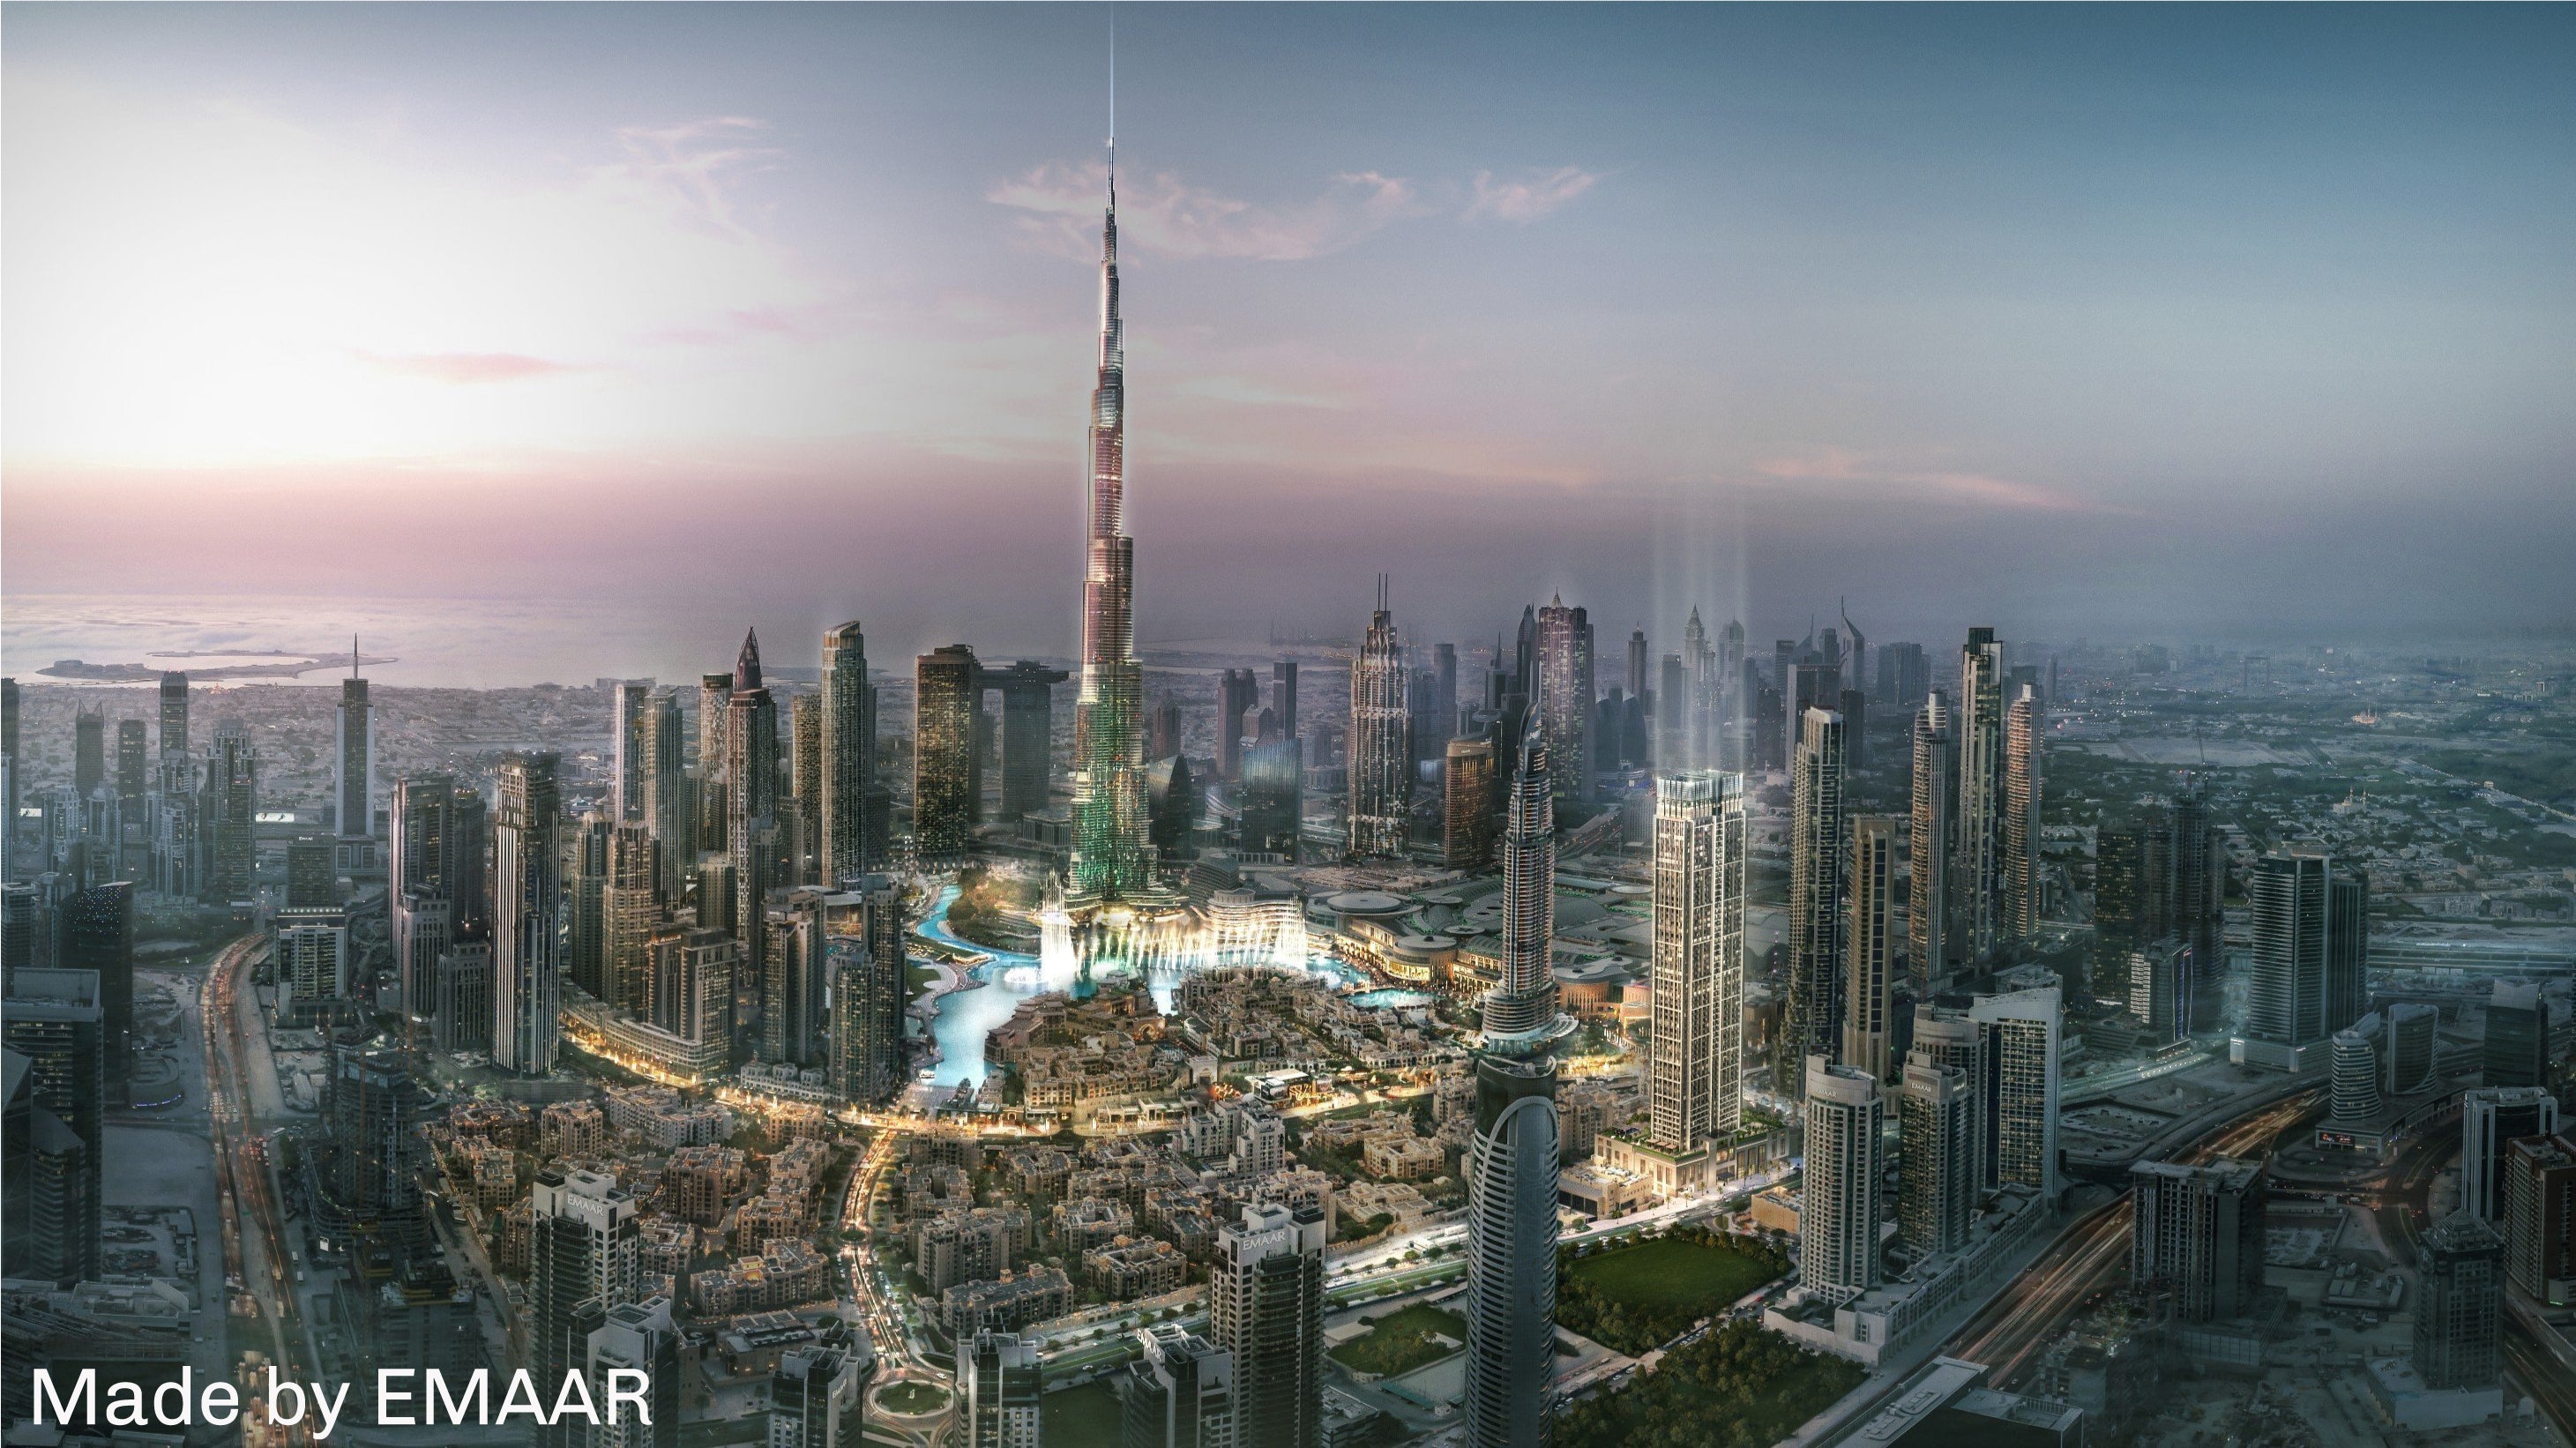 From the builders of the Burj Khalifa